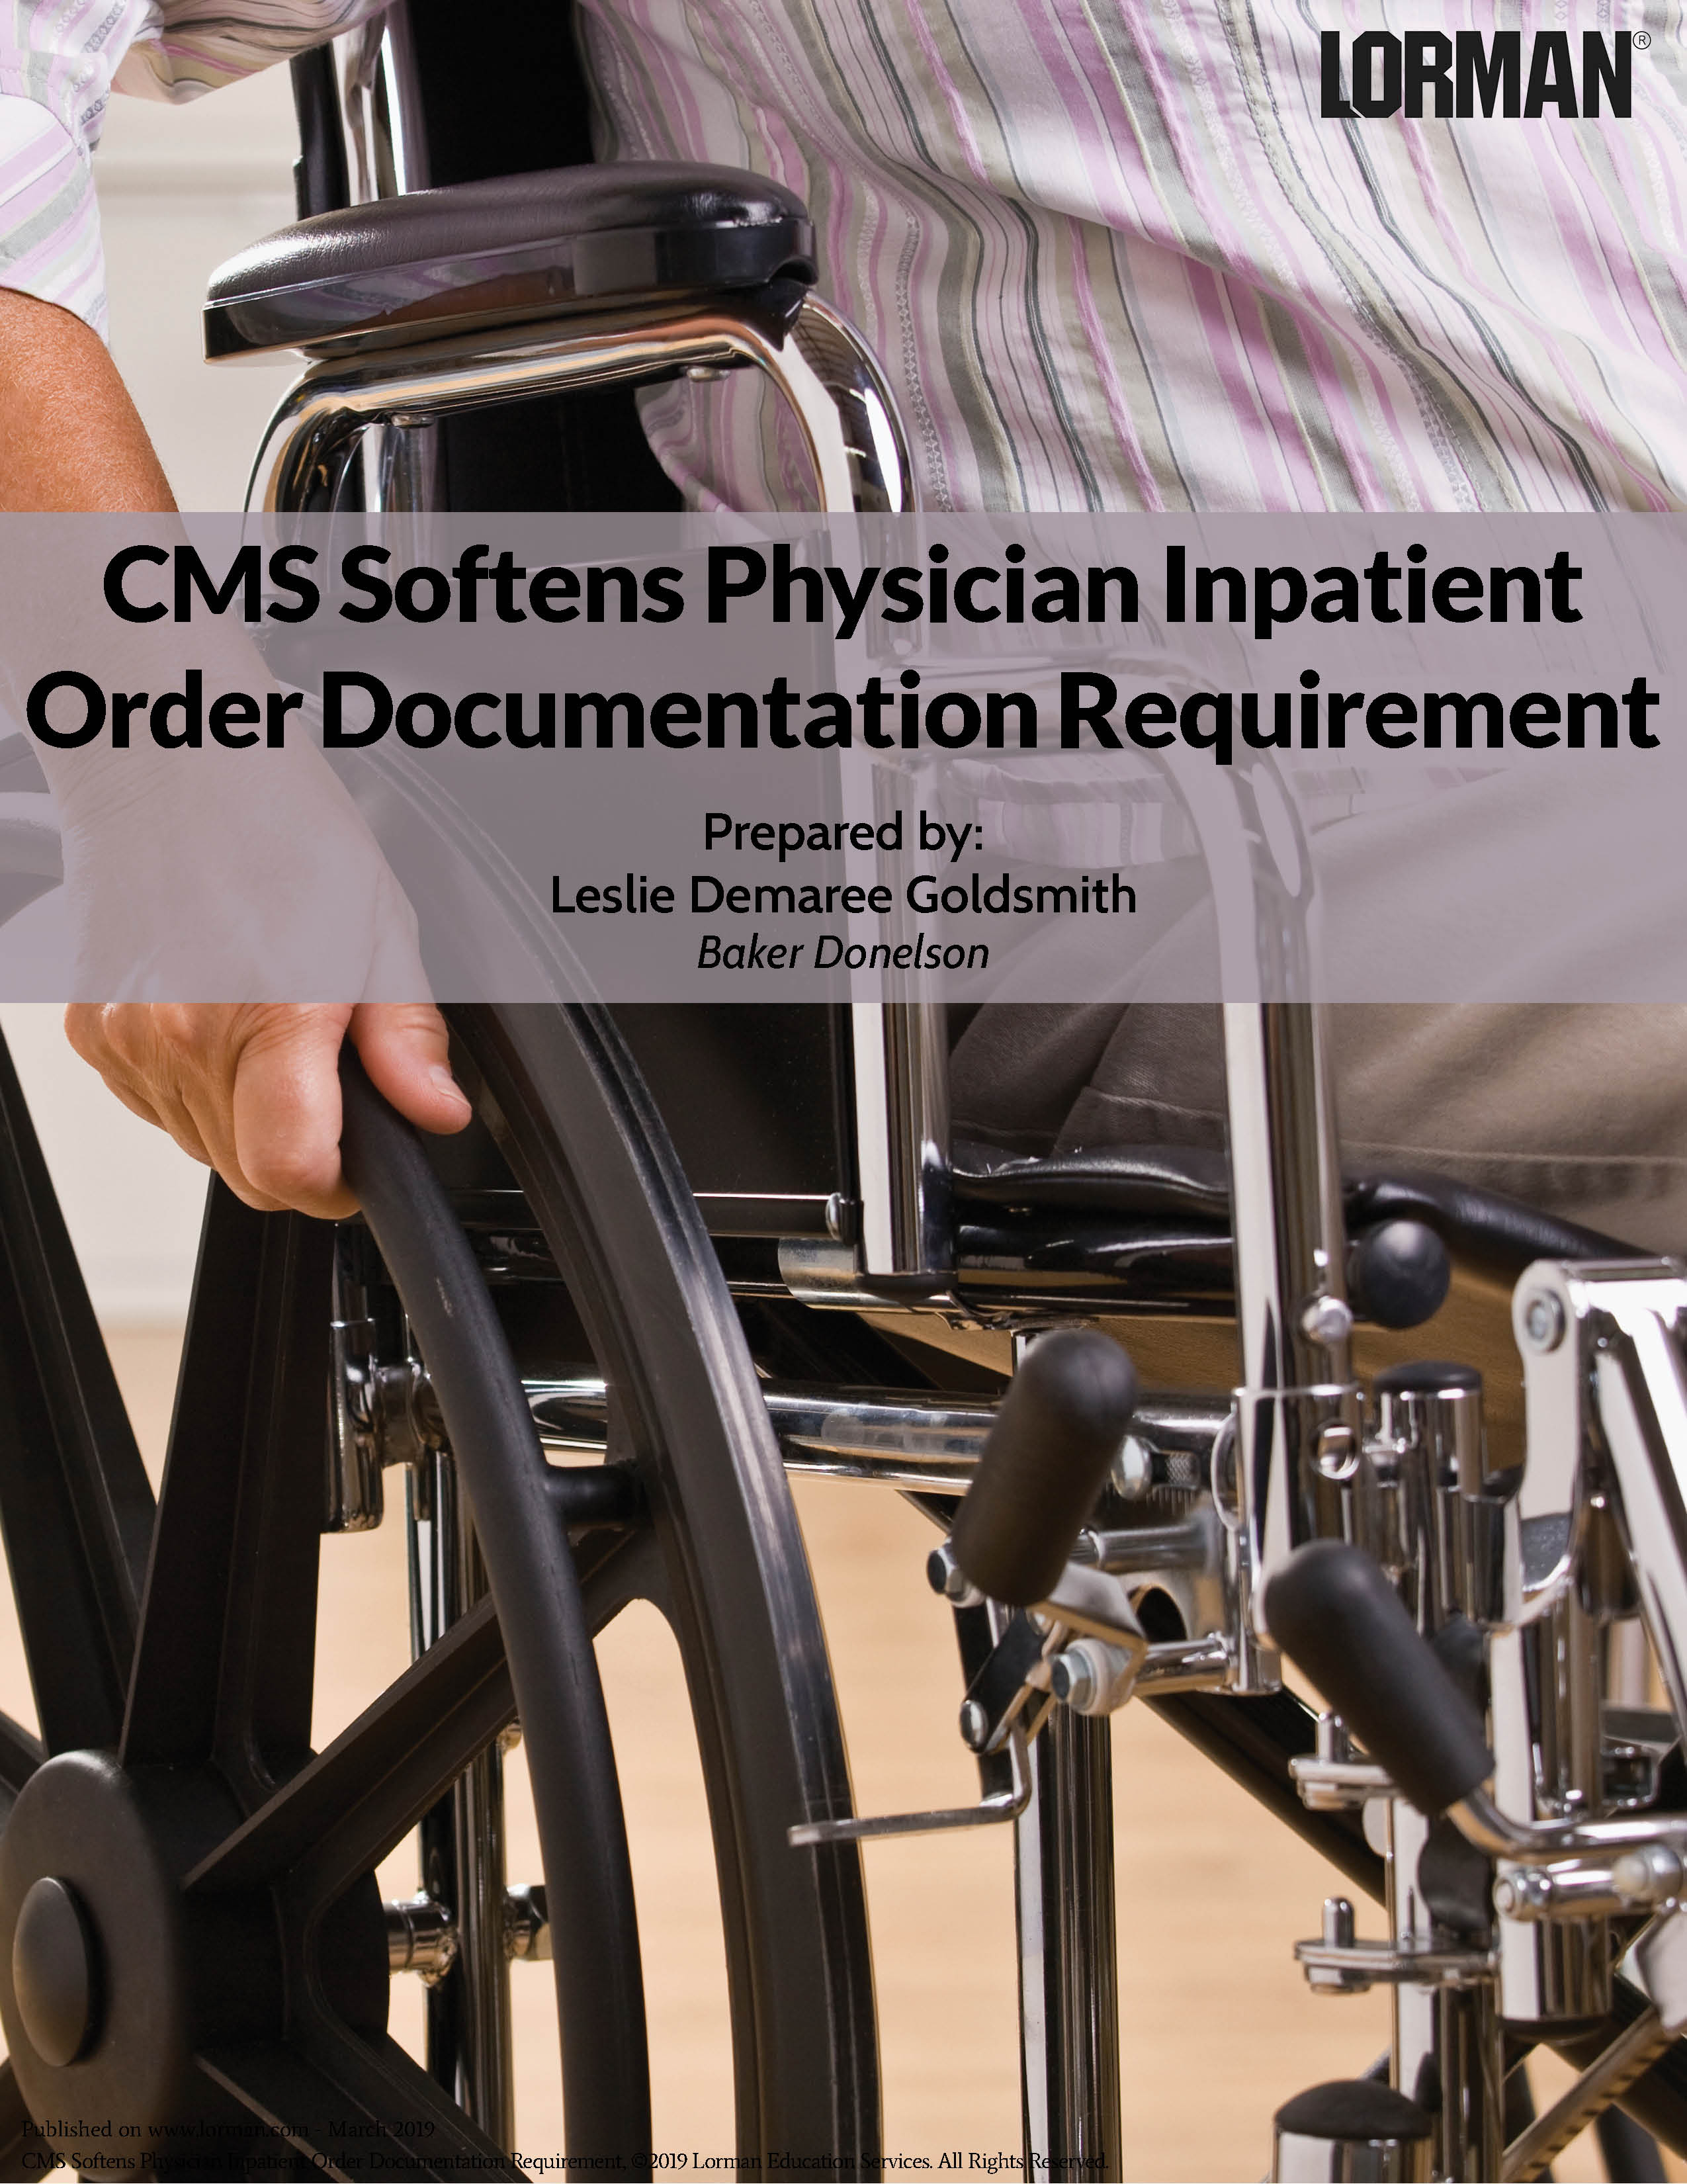 CMS Softens Physician Inpatient Order Documentation Requirement